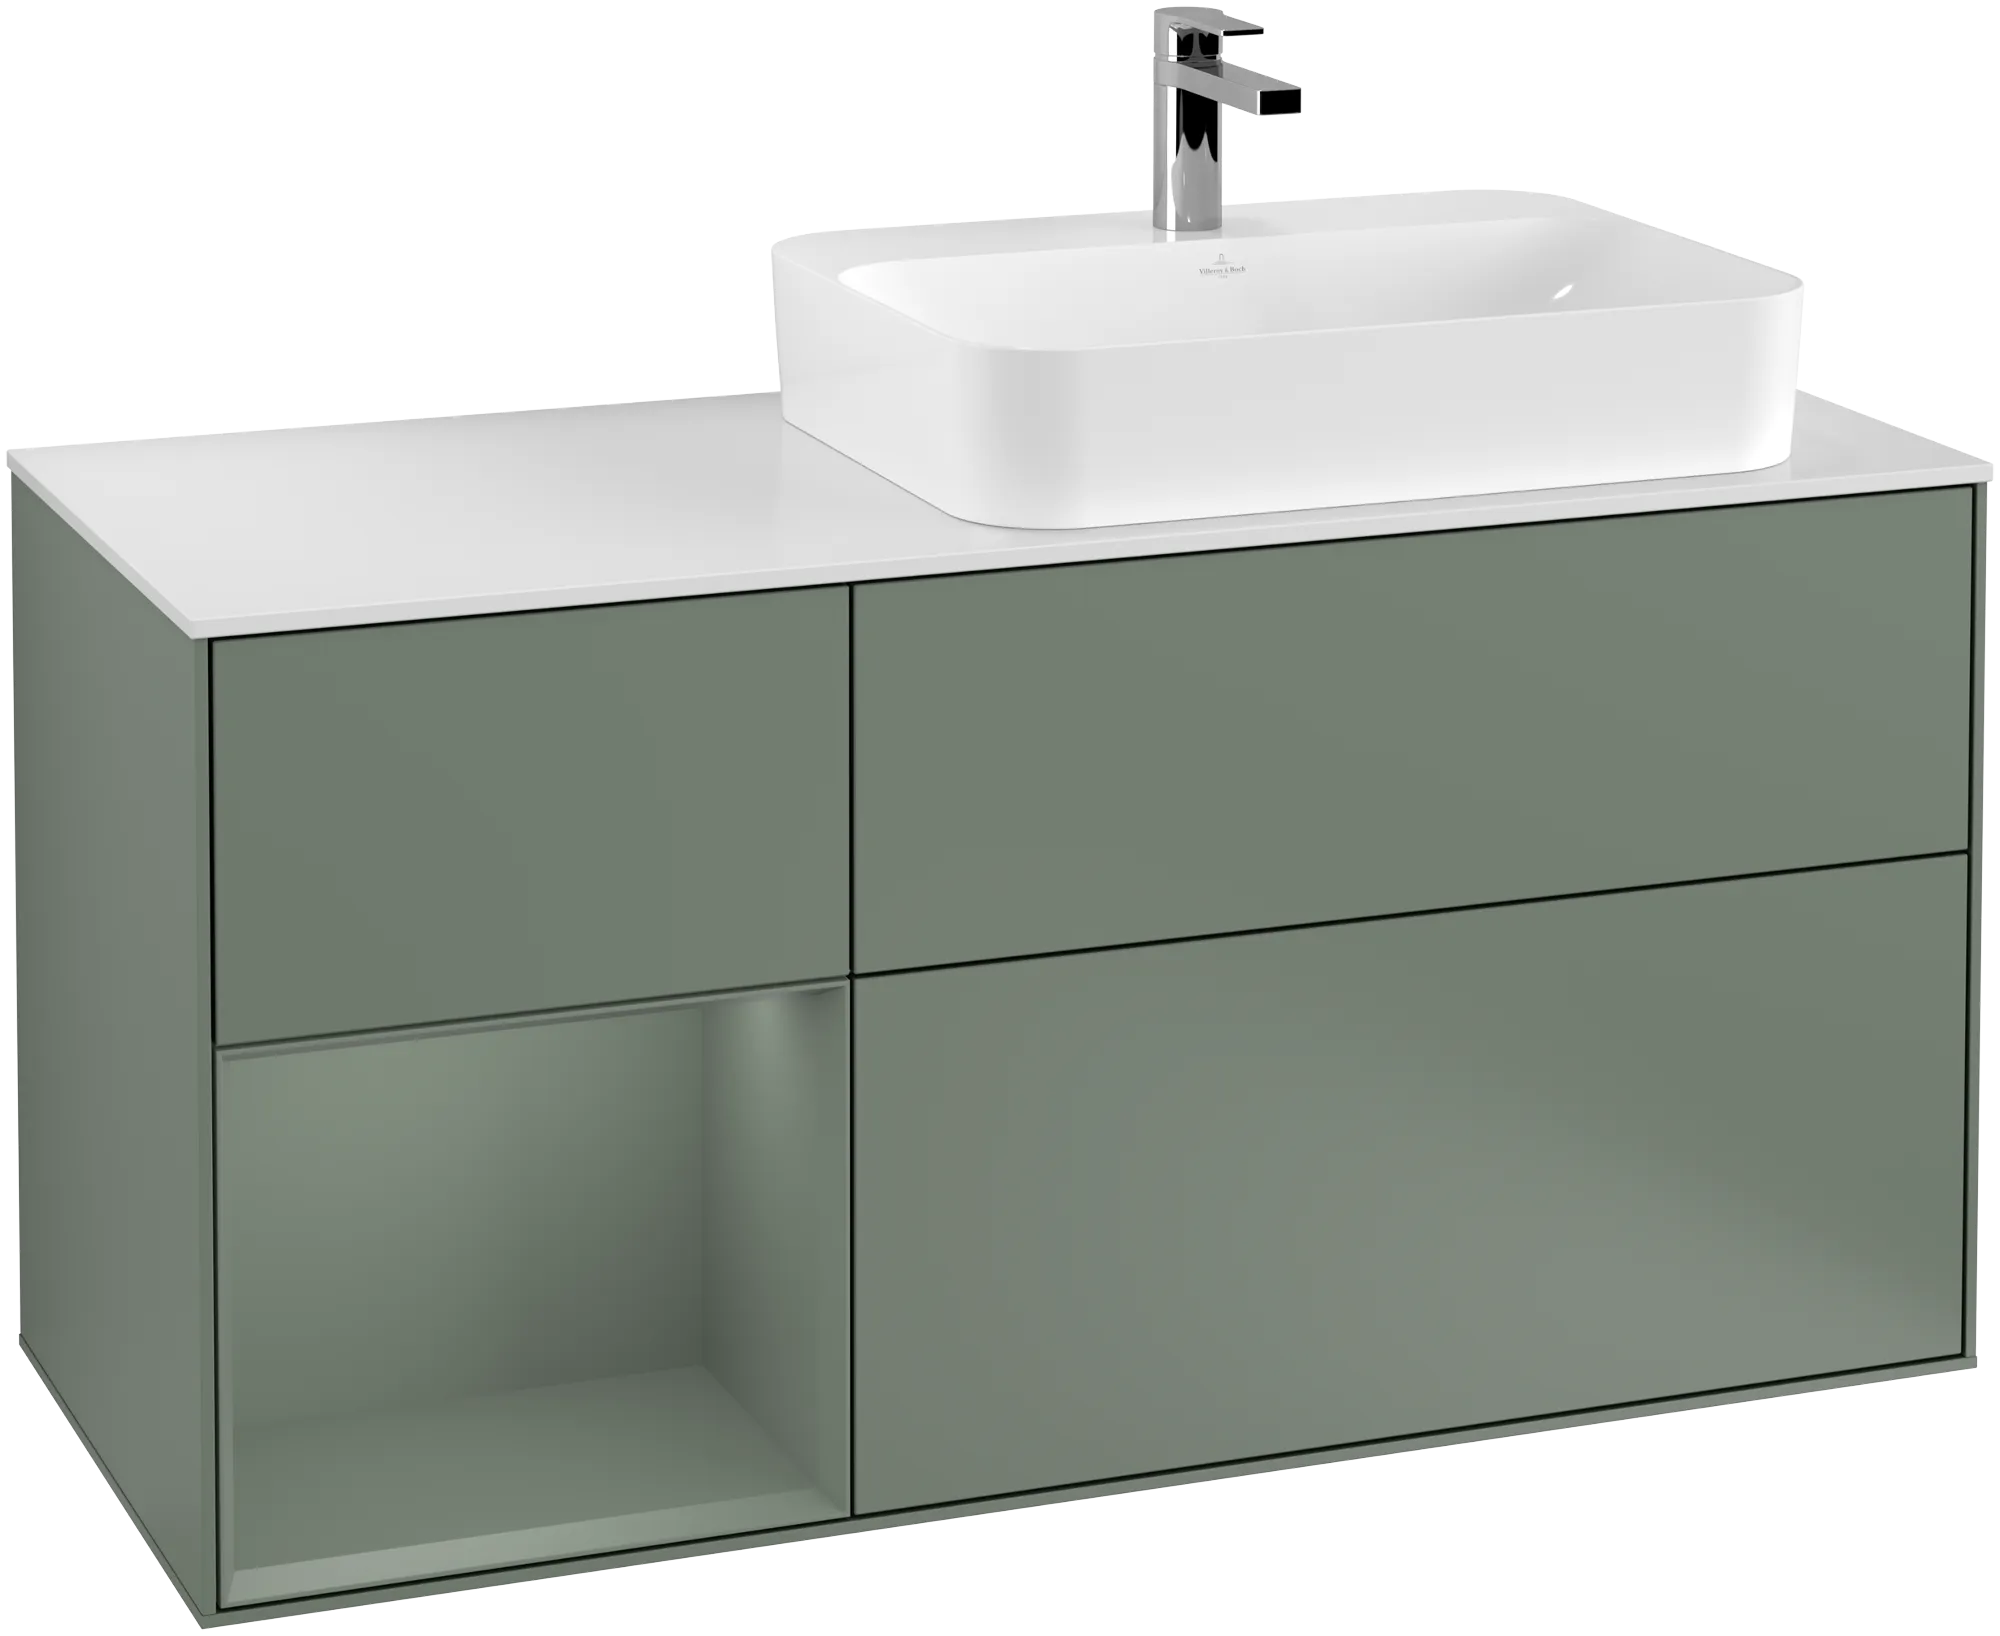 Picture of VILLEROY BOCH Finion Vanity unit, with lighting, 3 pull-out compartments, 1200 x 603 x 501 mm, Olive Matt Lacquer / Olive Matt Lacquer / Glass White Matt #G391GMGM